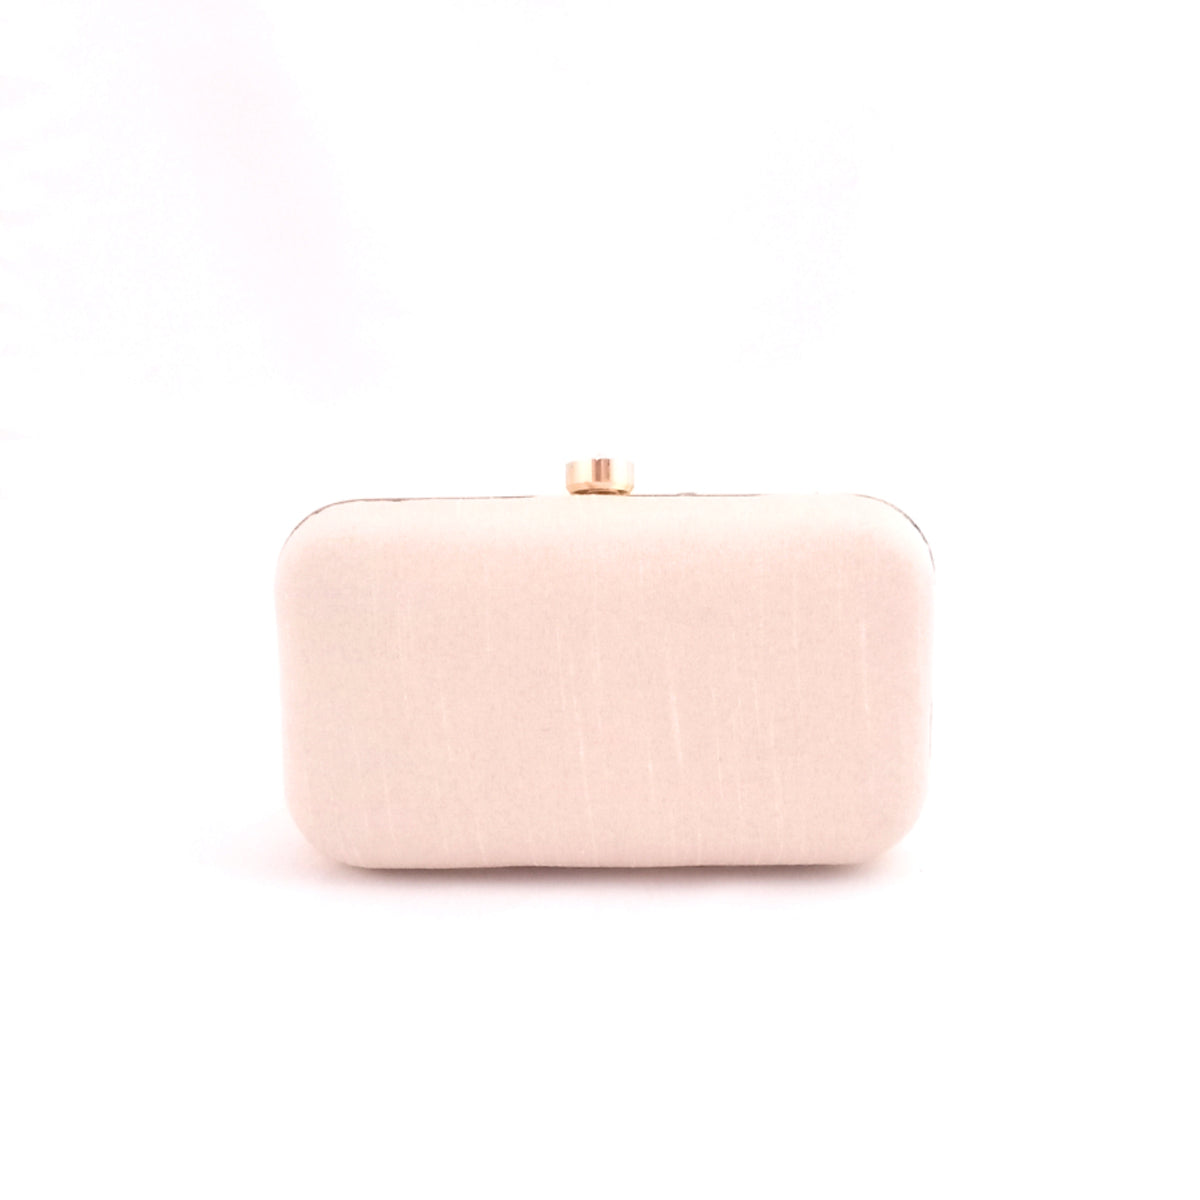 Tricolored handembroidered clutch